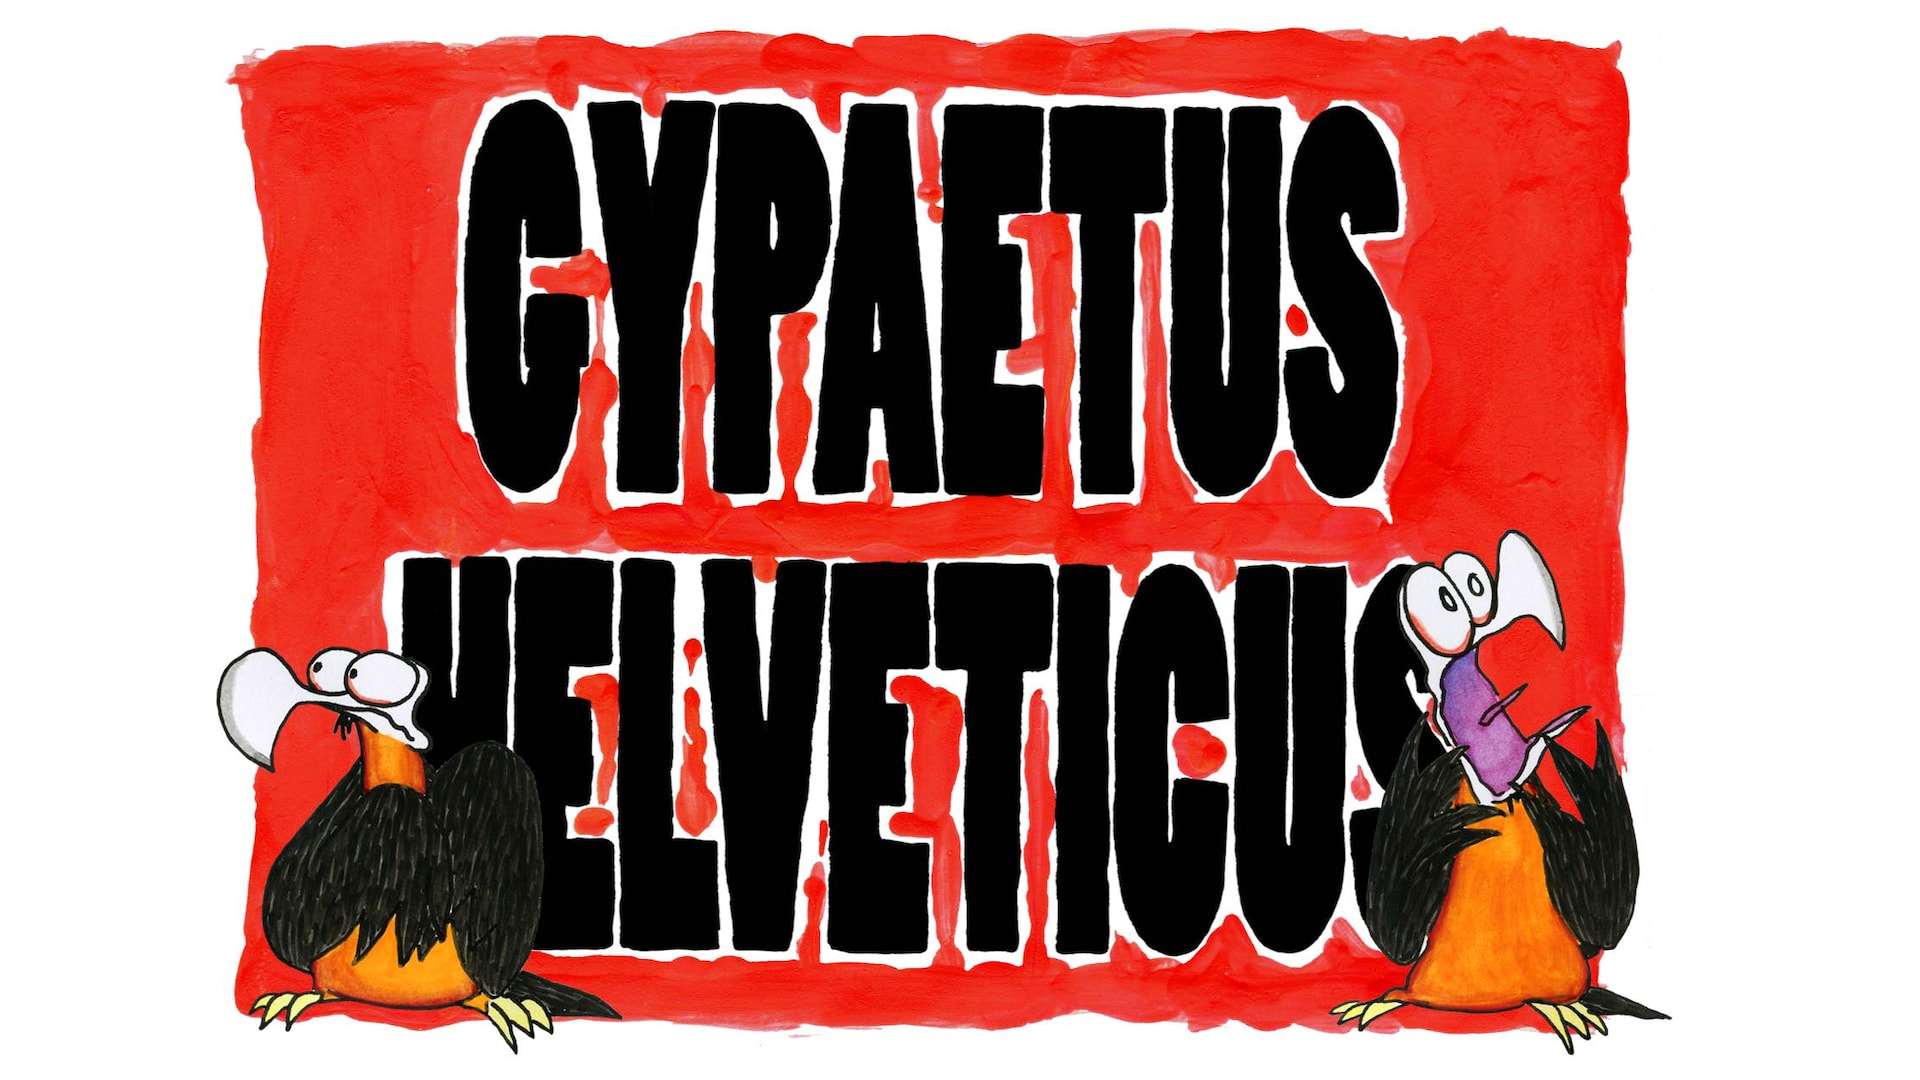 Gypaetus Helveticus